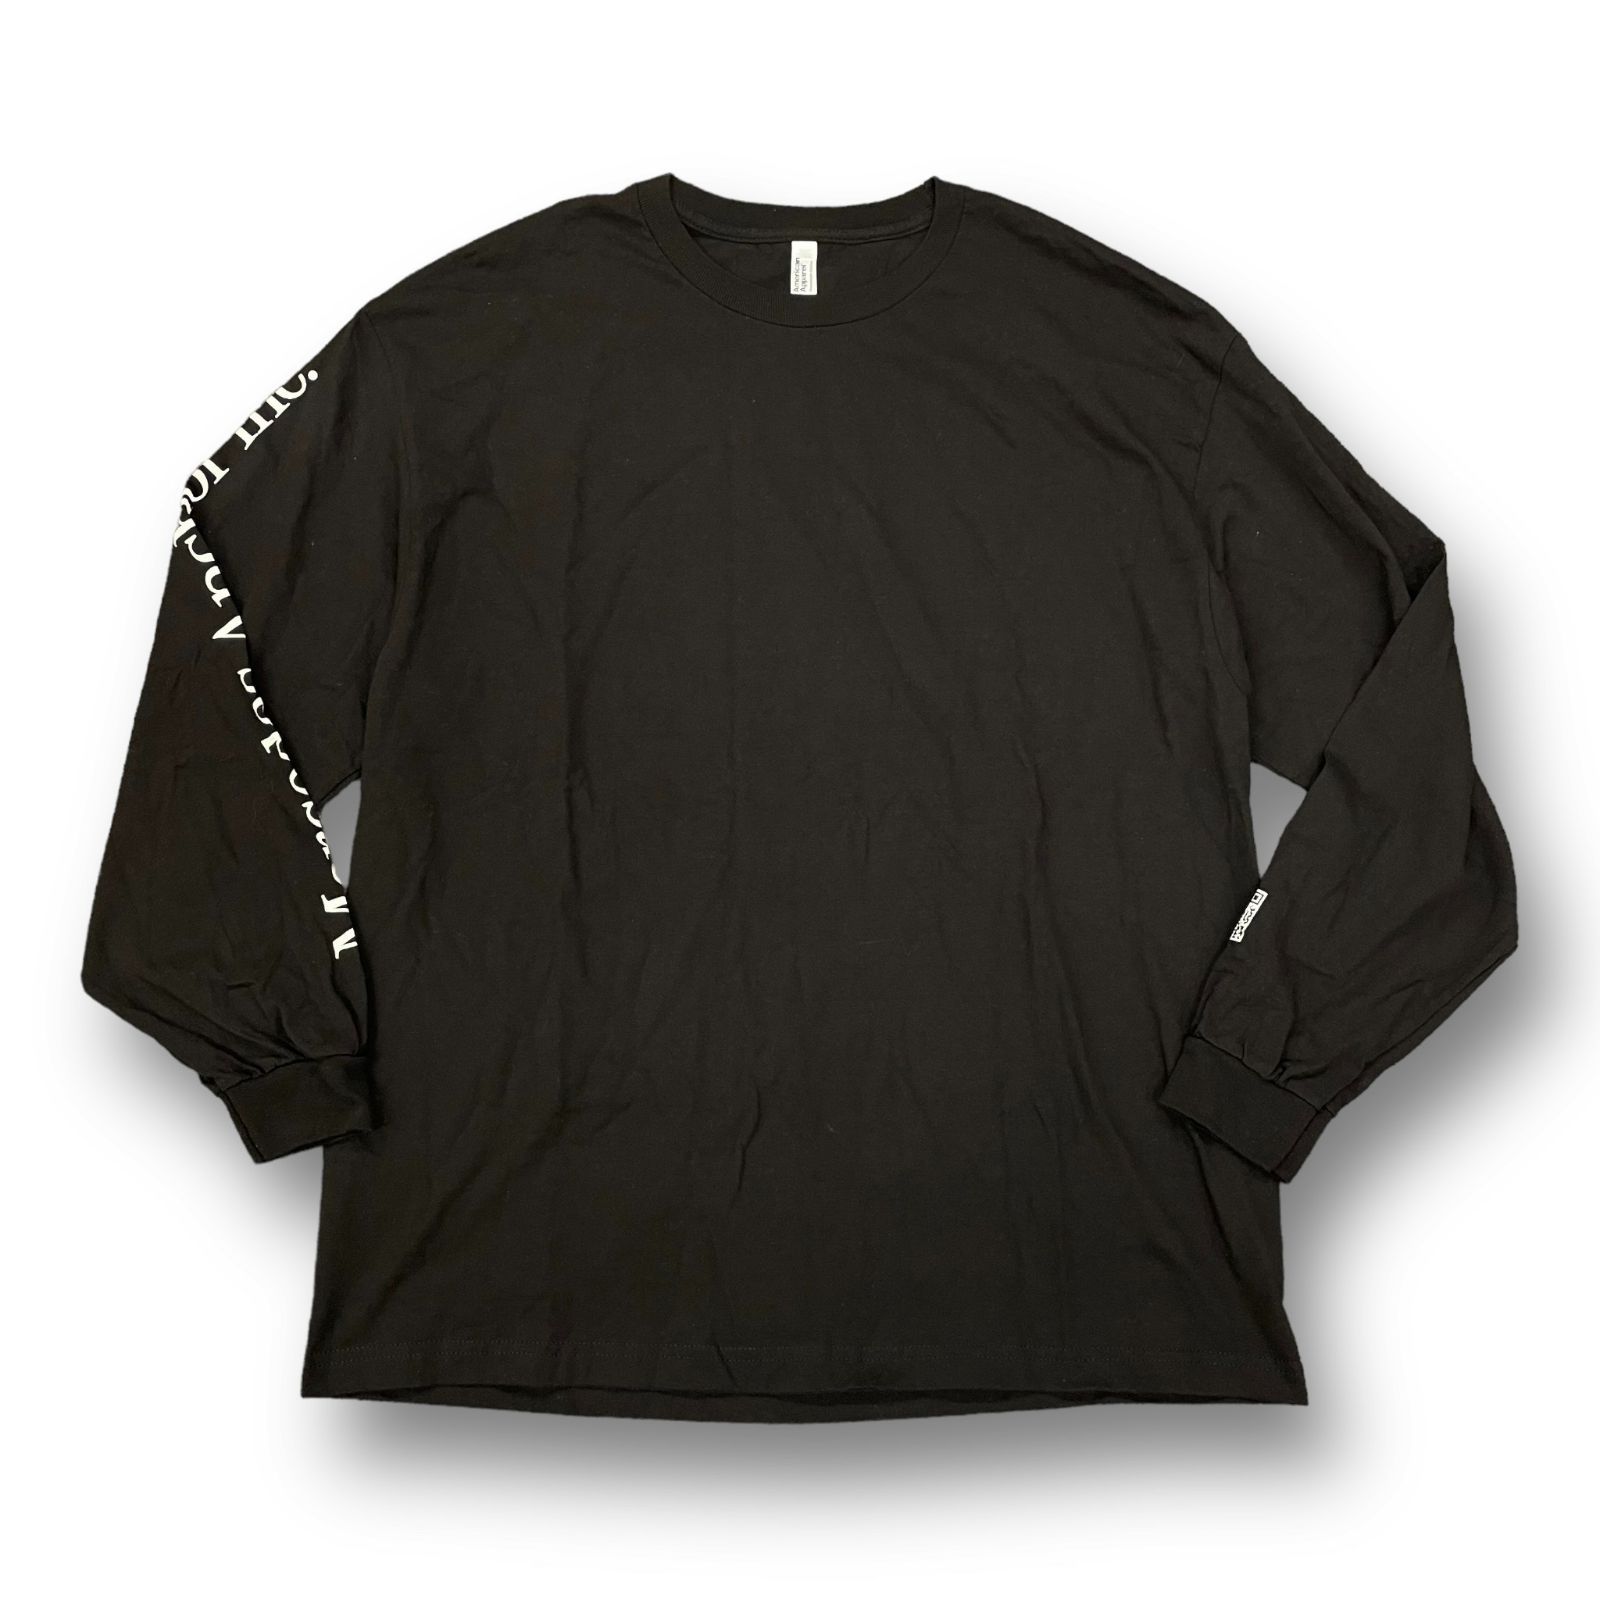 MERCEDES ANCHOR INC. L/S TEE クルーネック カットソー プリントロゴ